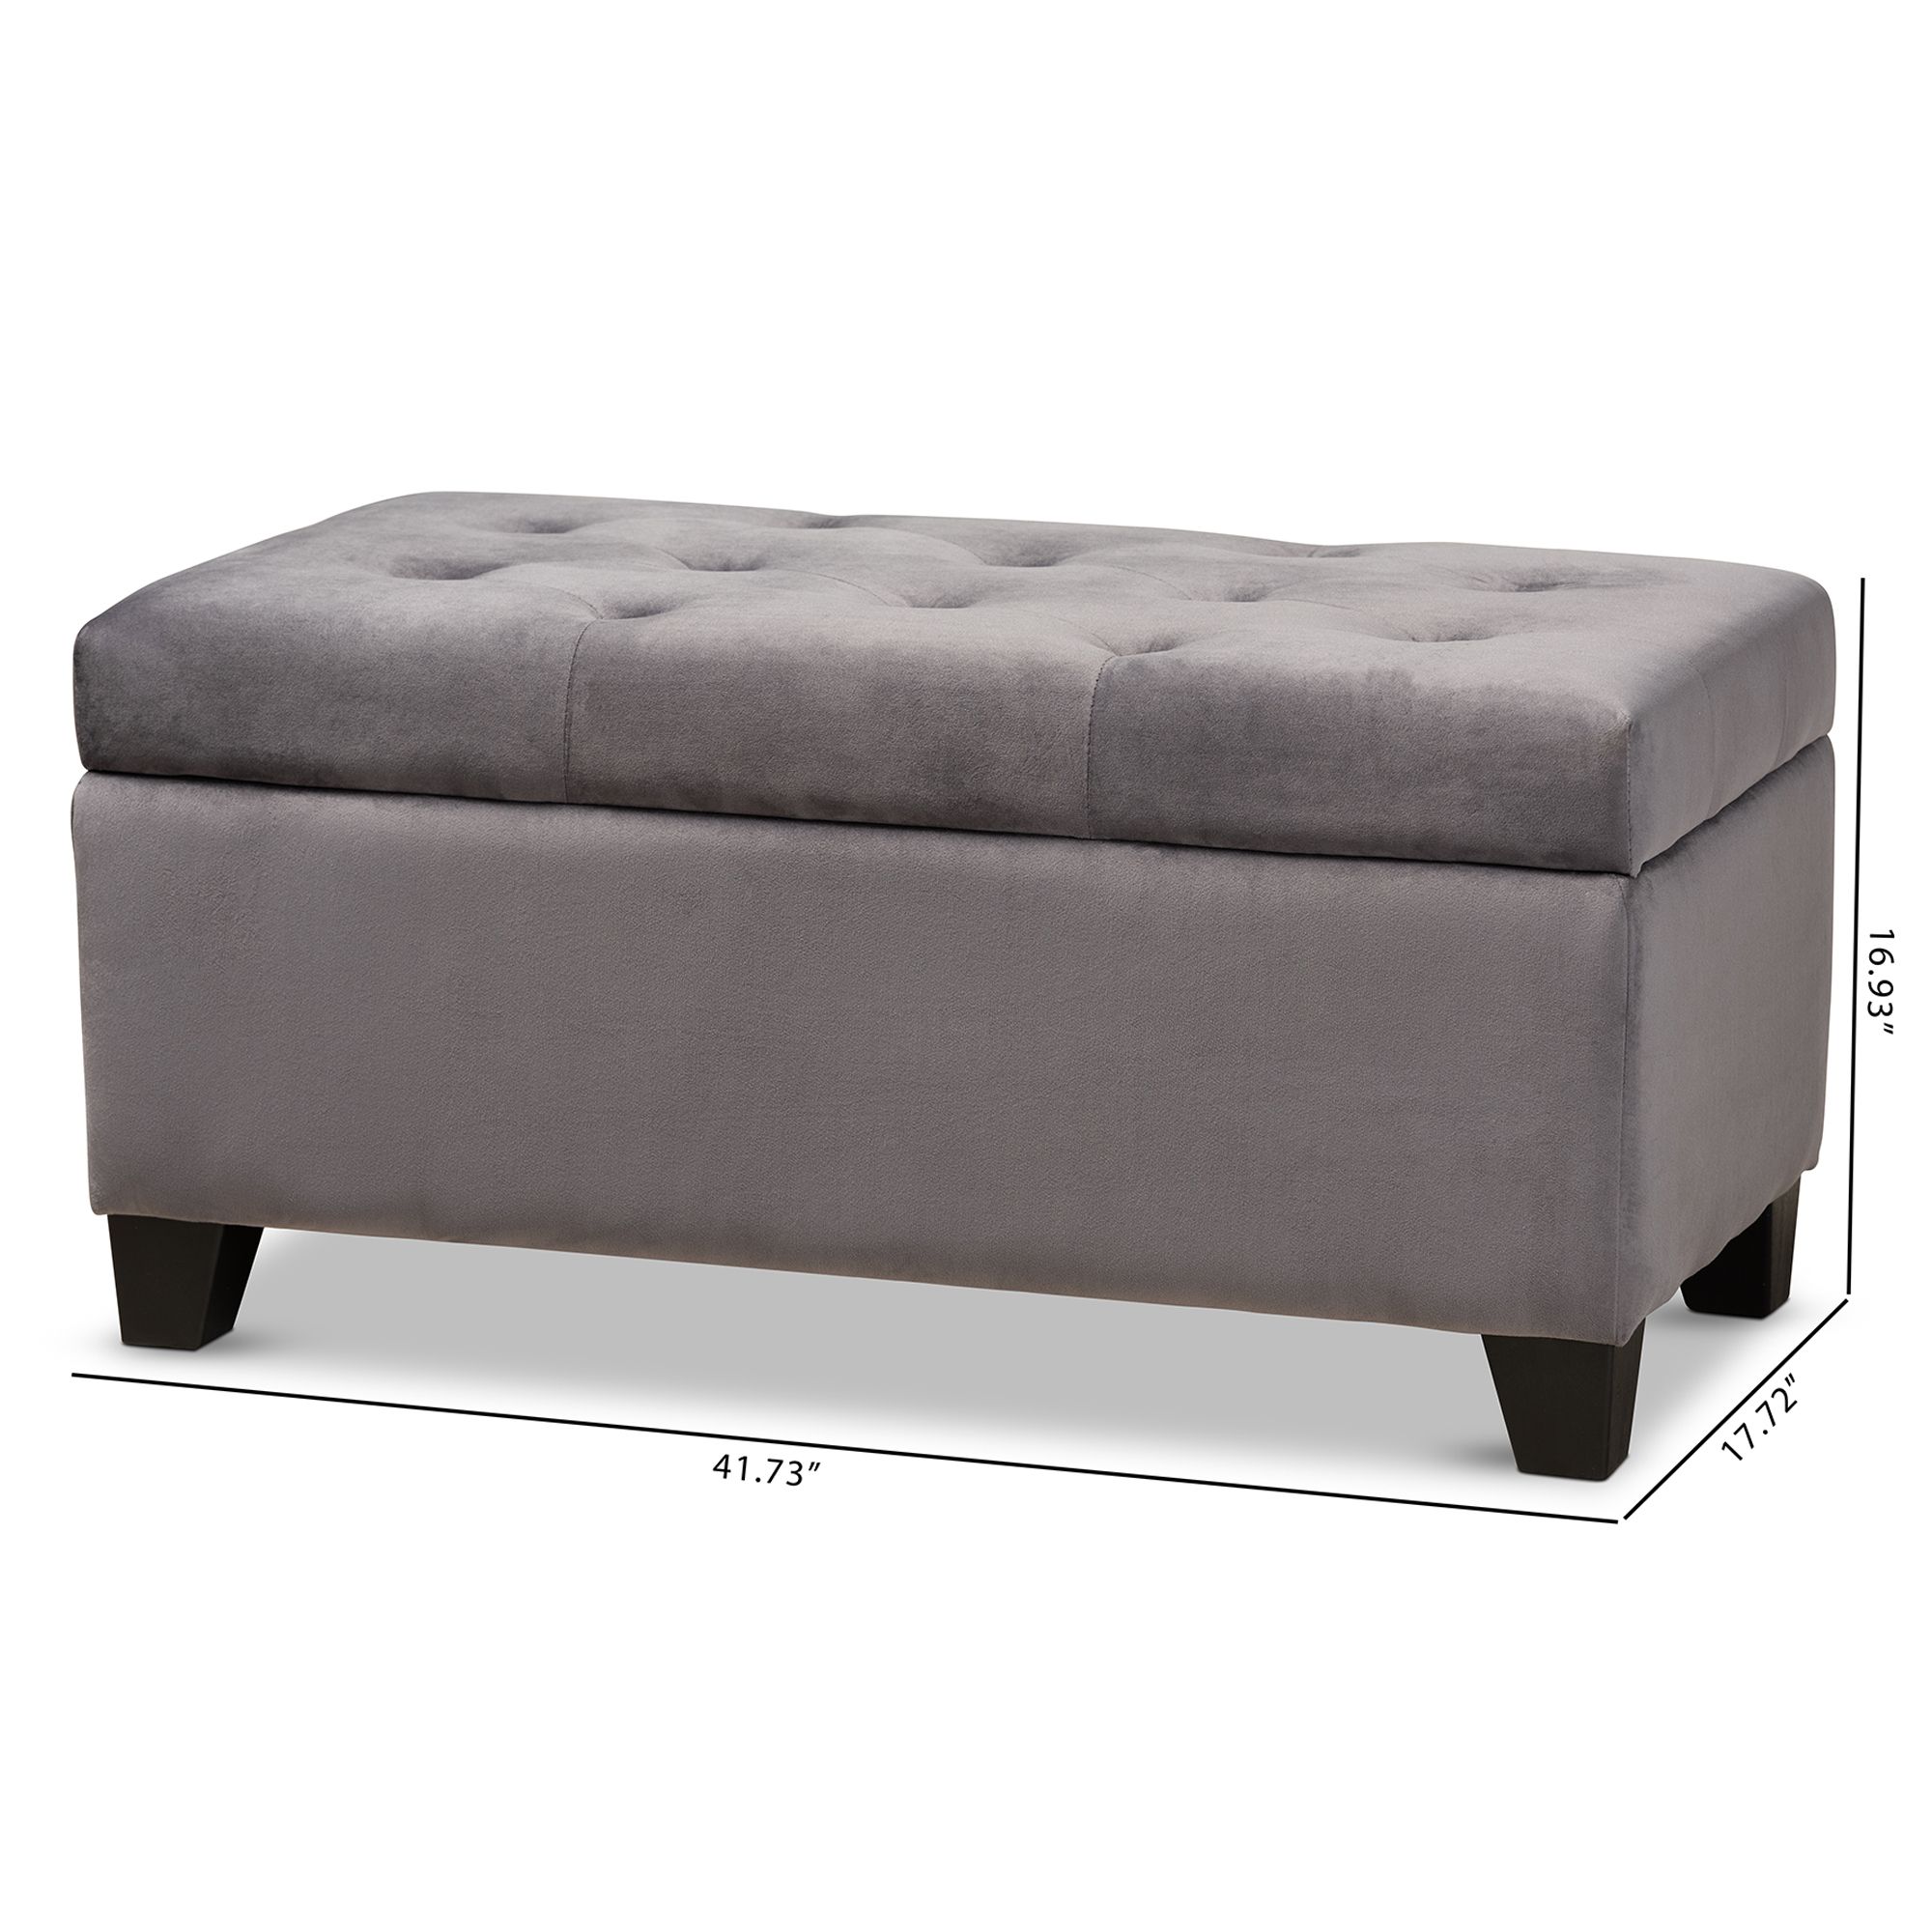 Michaela Modern Button Tufted Velvet Fabric Upholstery 35" Storage Pertaining To Tufted Fabric Ottomans (View 4 of 20)